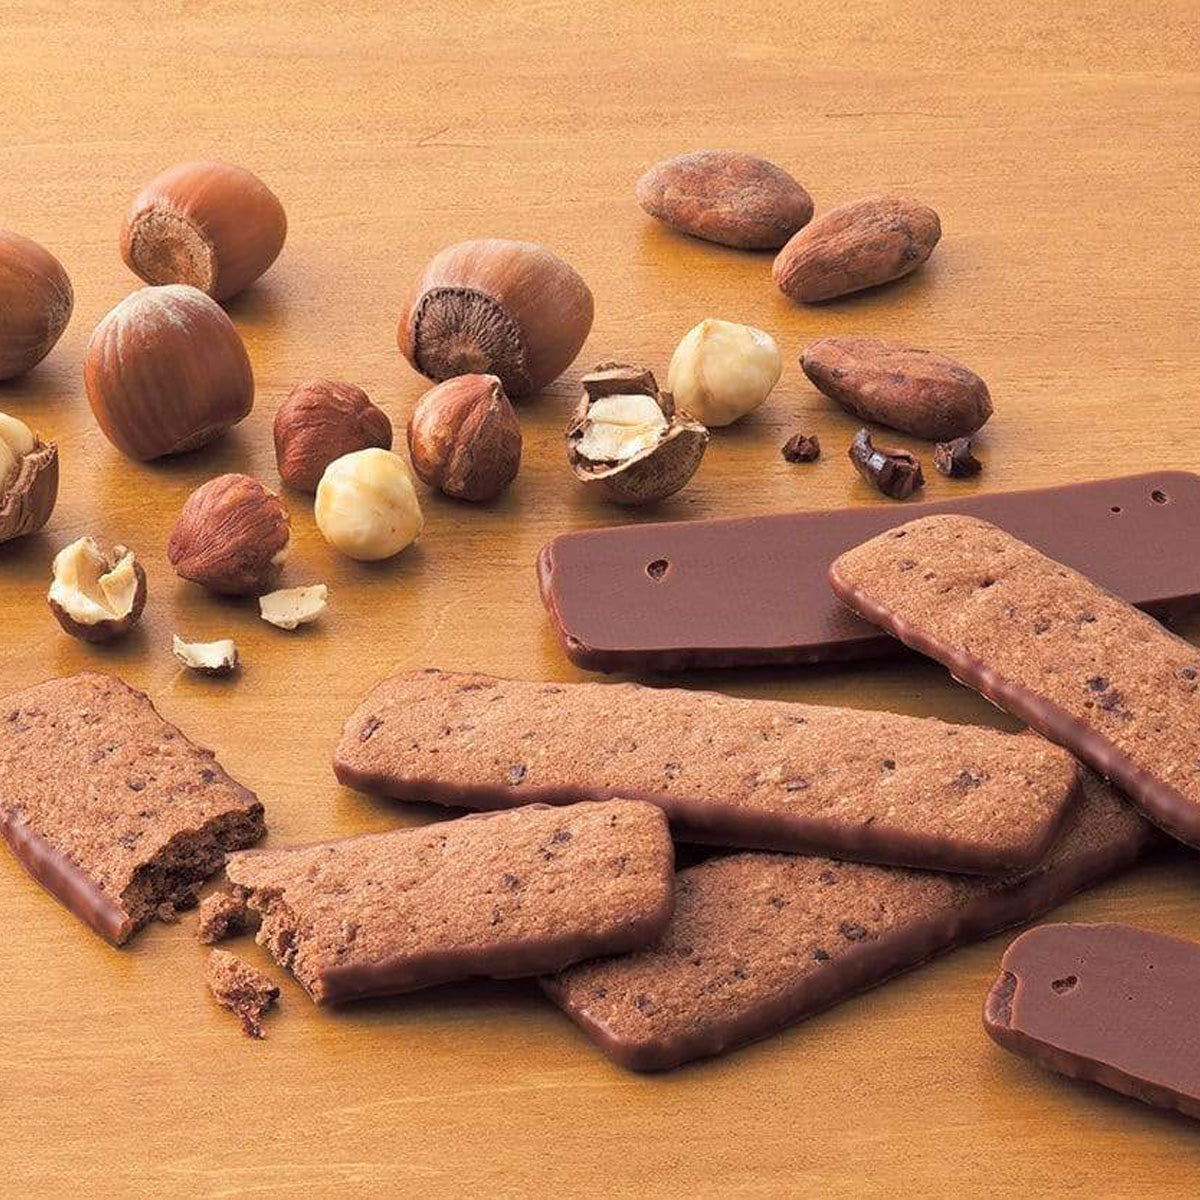 ROYCE' Chocolate - Baton Cookies "Hazel Cacao" - Image shows brown cookies with brown chocolate chips coated with brown chocolate. Accents include nuts in various shapes. Background is brown.